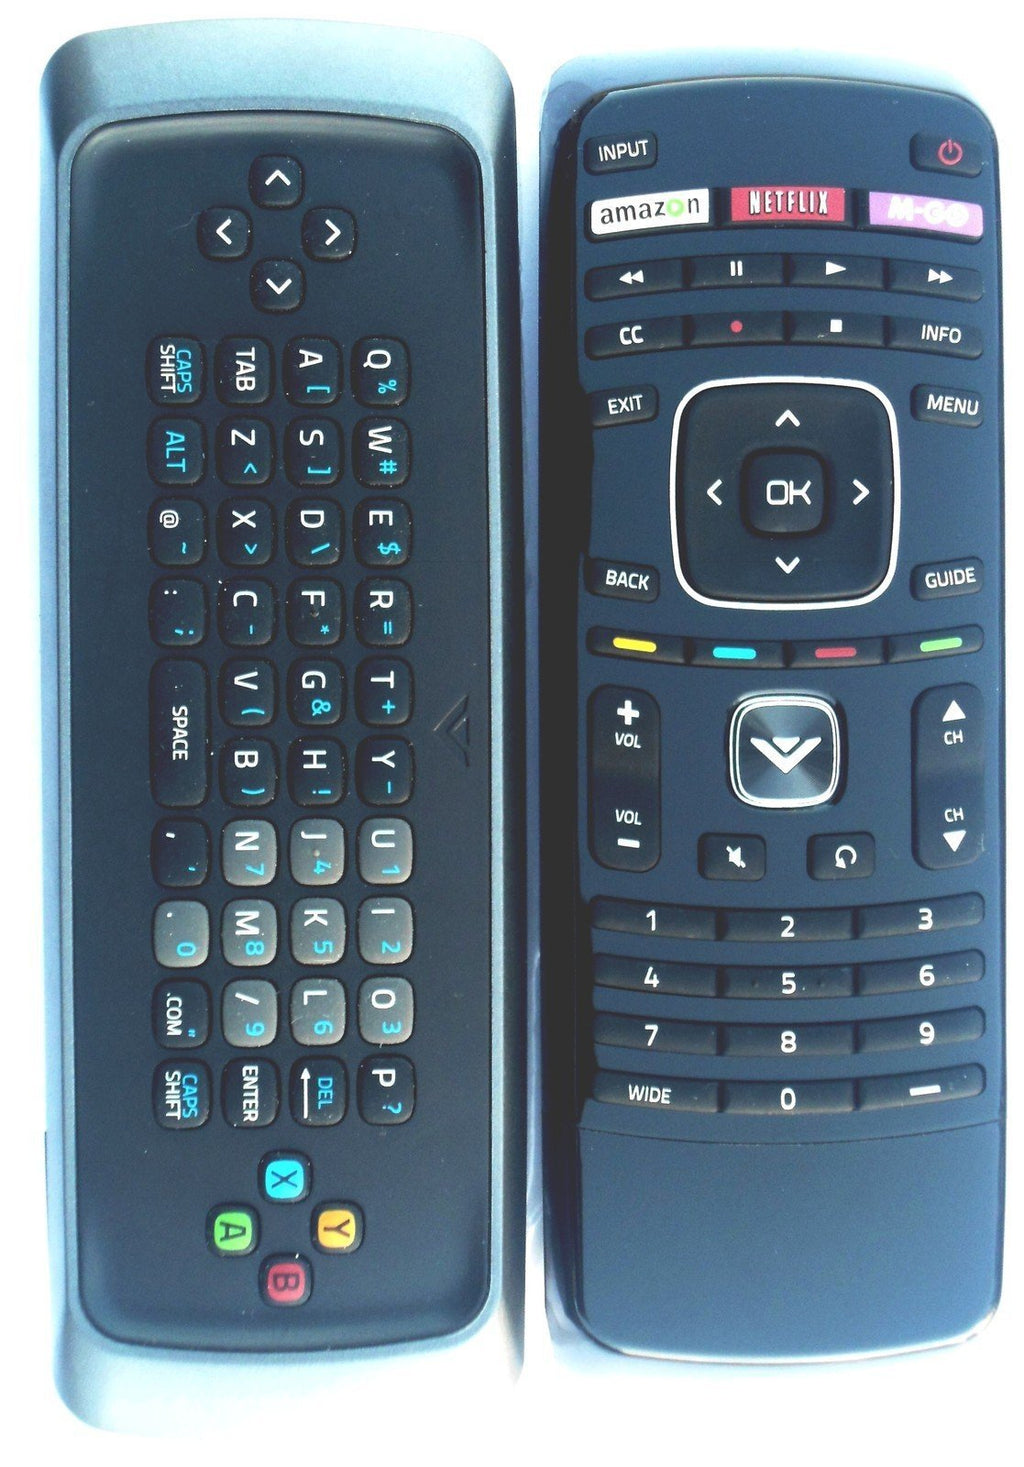 New Dual Side Keyboard Internet Remote for M470vse M650vse M550vse E420i-a1 E500i-a1 E601i-a3 E470i-a0 M420kd